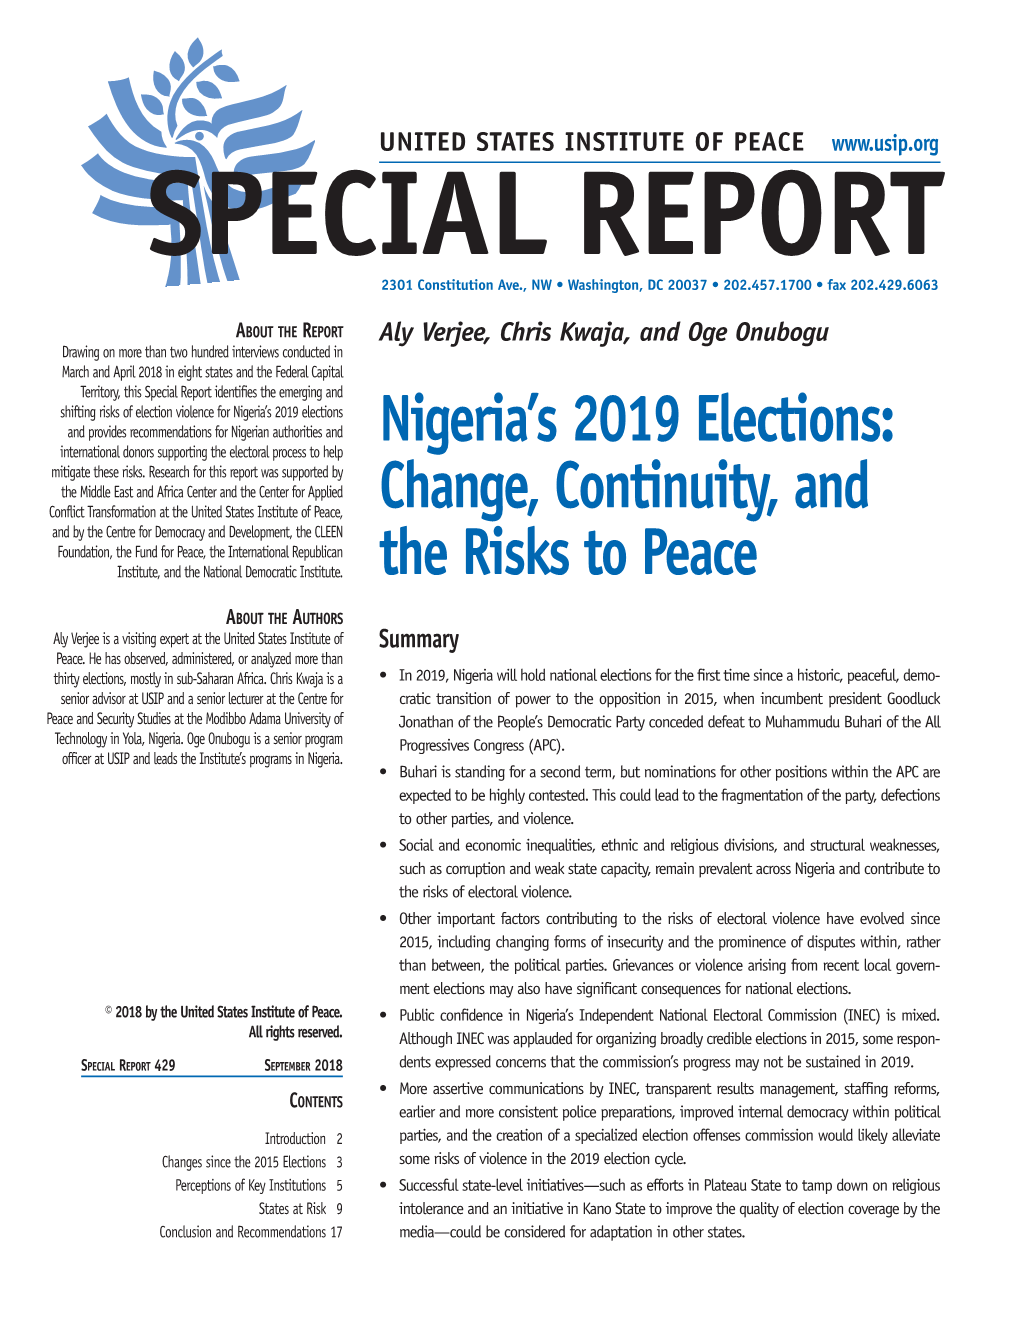 Nigeria's 2019 Elections: Change, Continuity, and the Risks to Peace